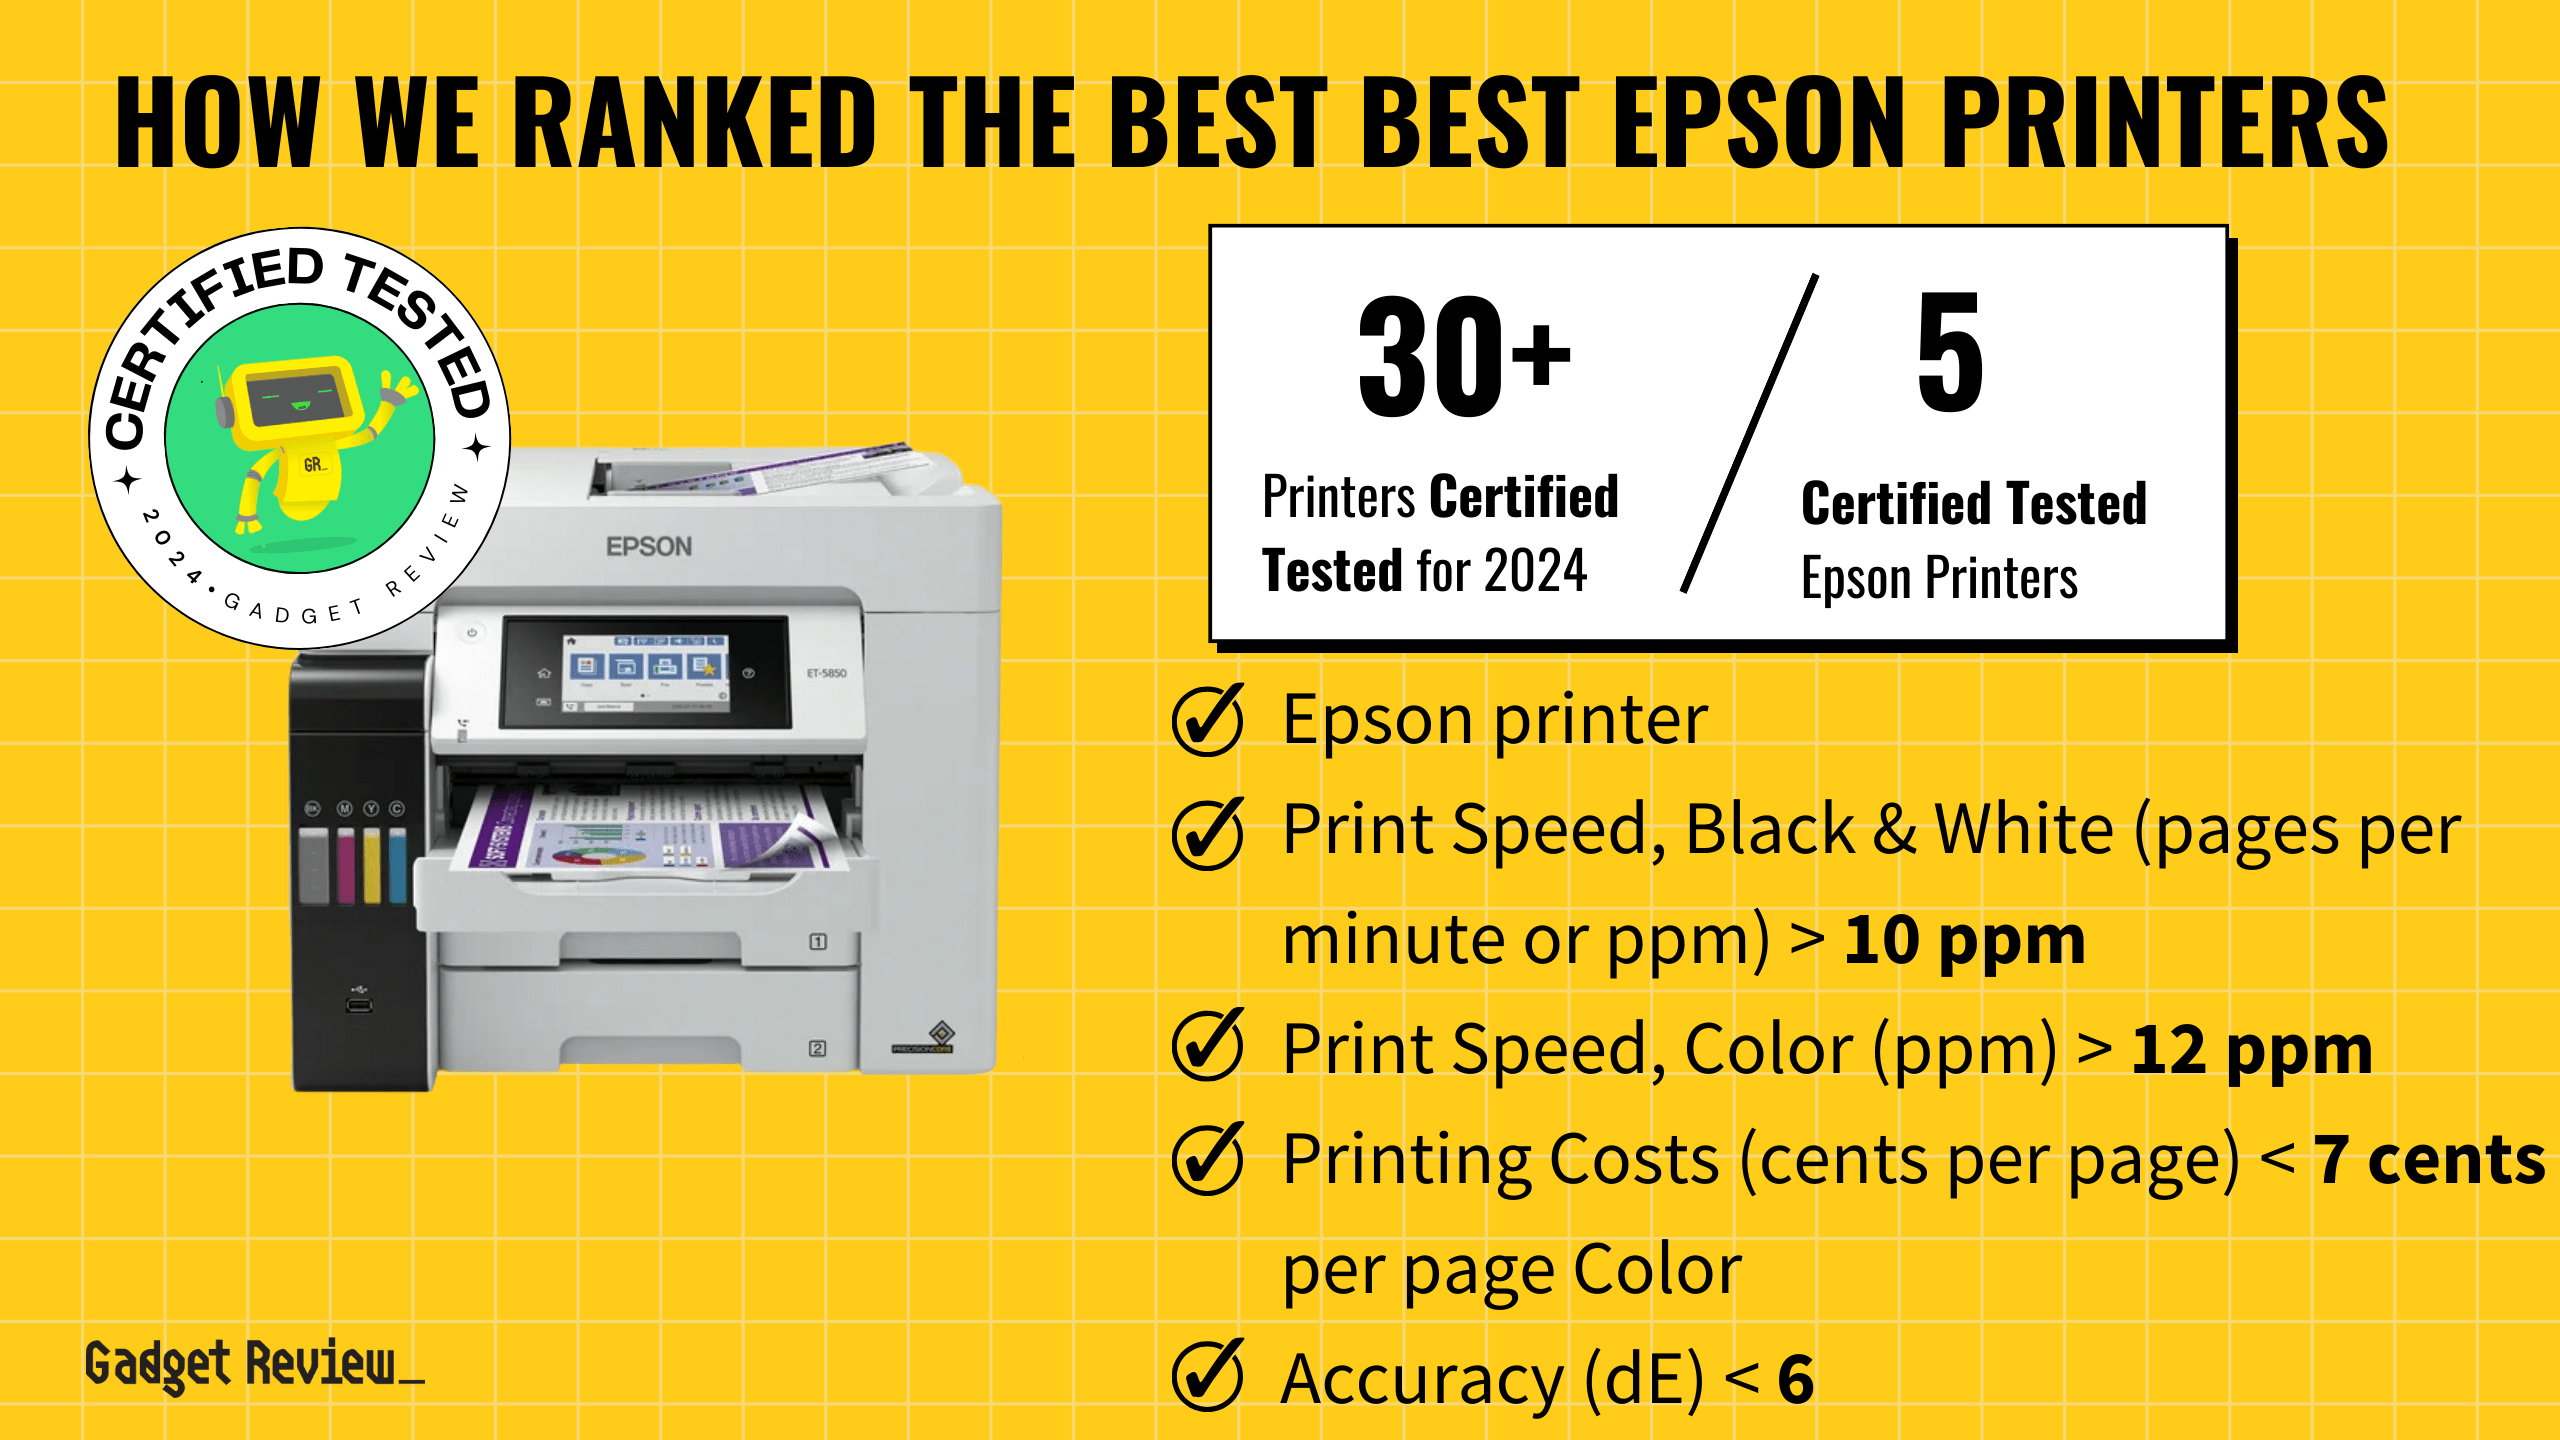 What are the Top 4 Epson Printers?